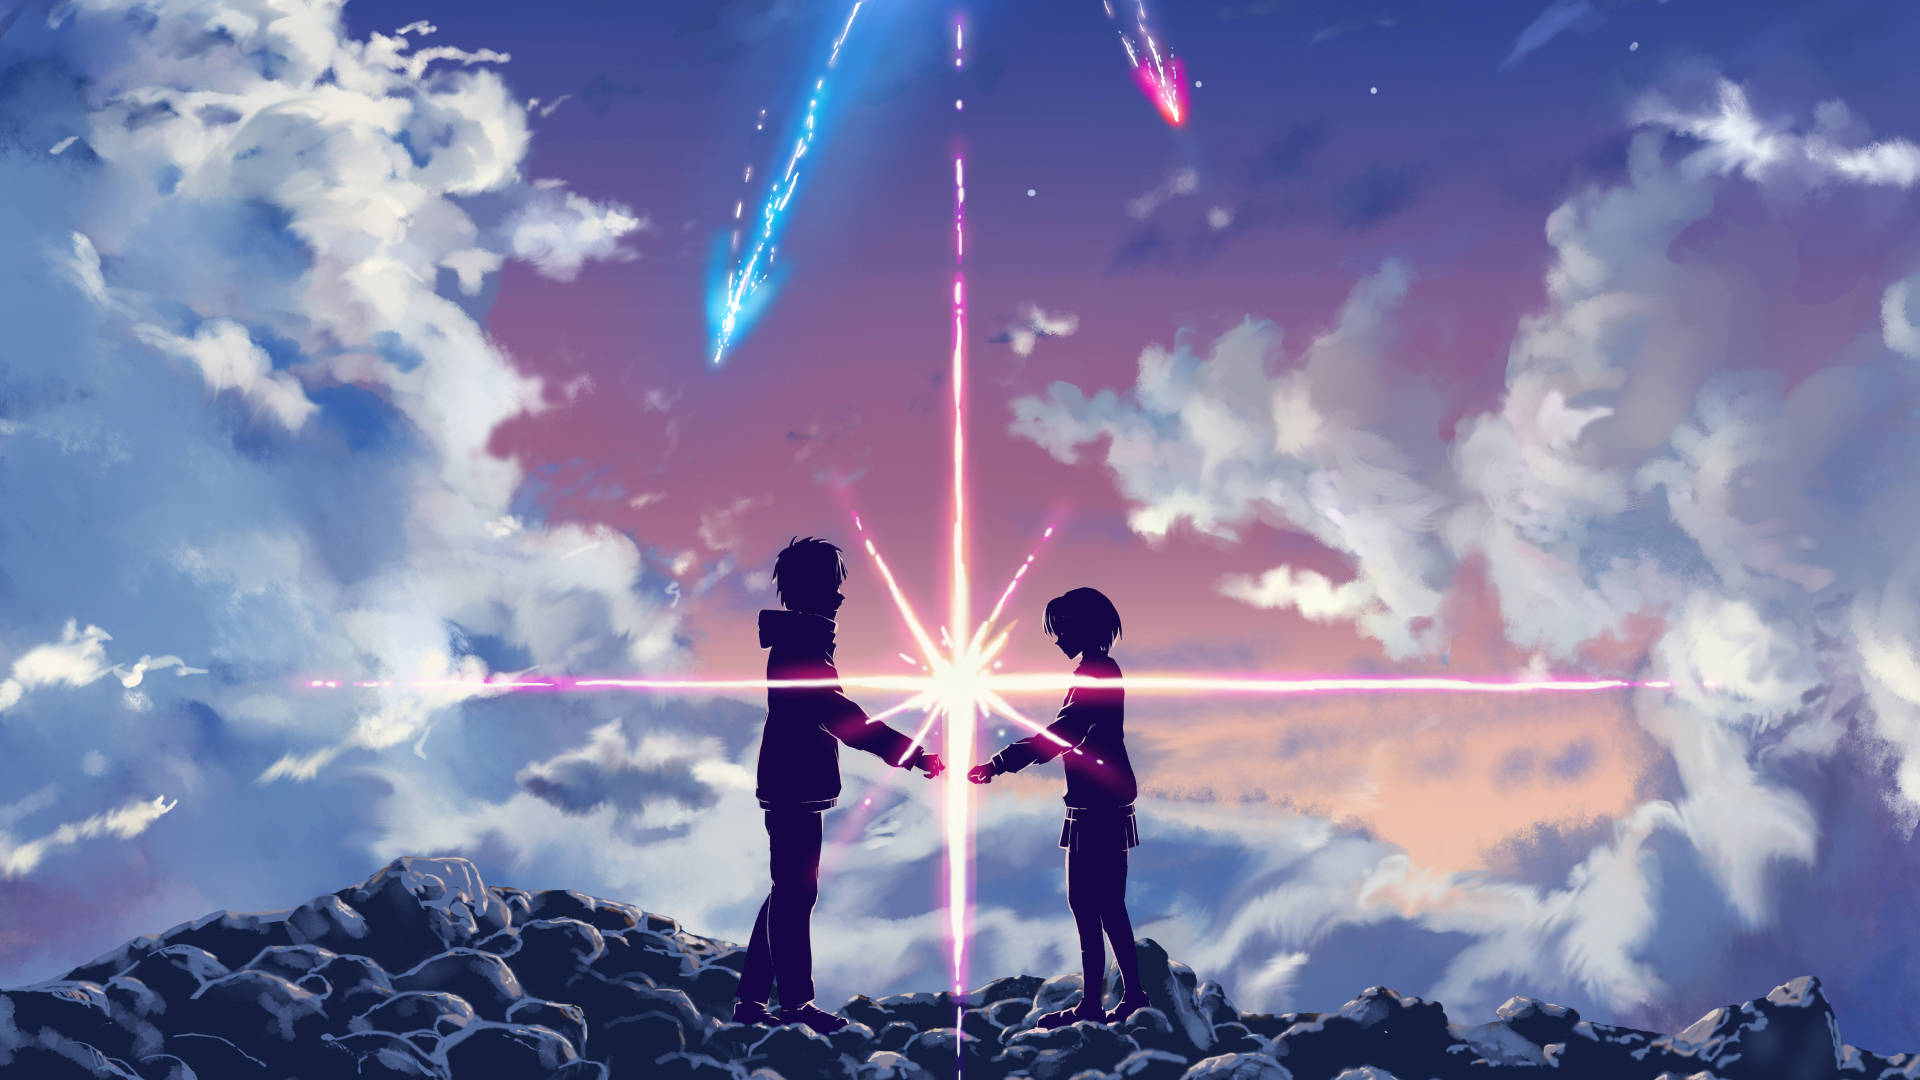 Your Name Anime 2016 Lovers Meeting Comet Wallpaper